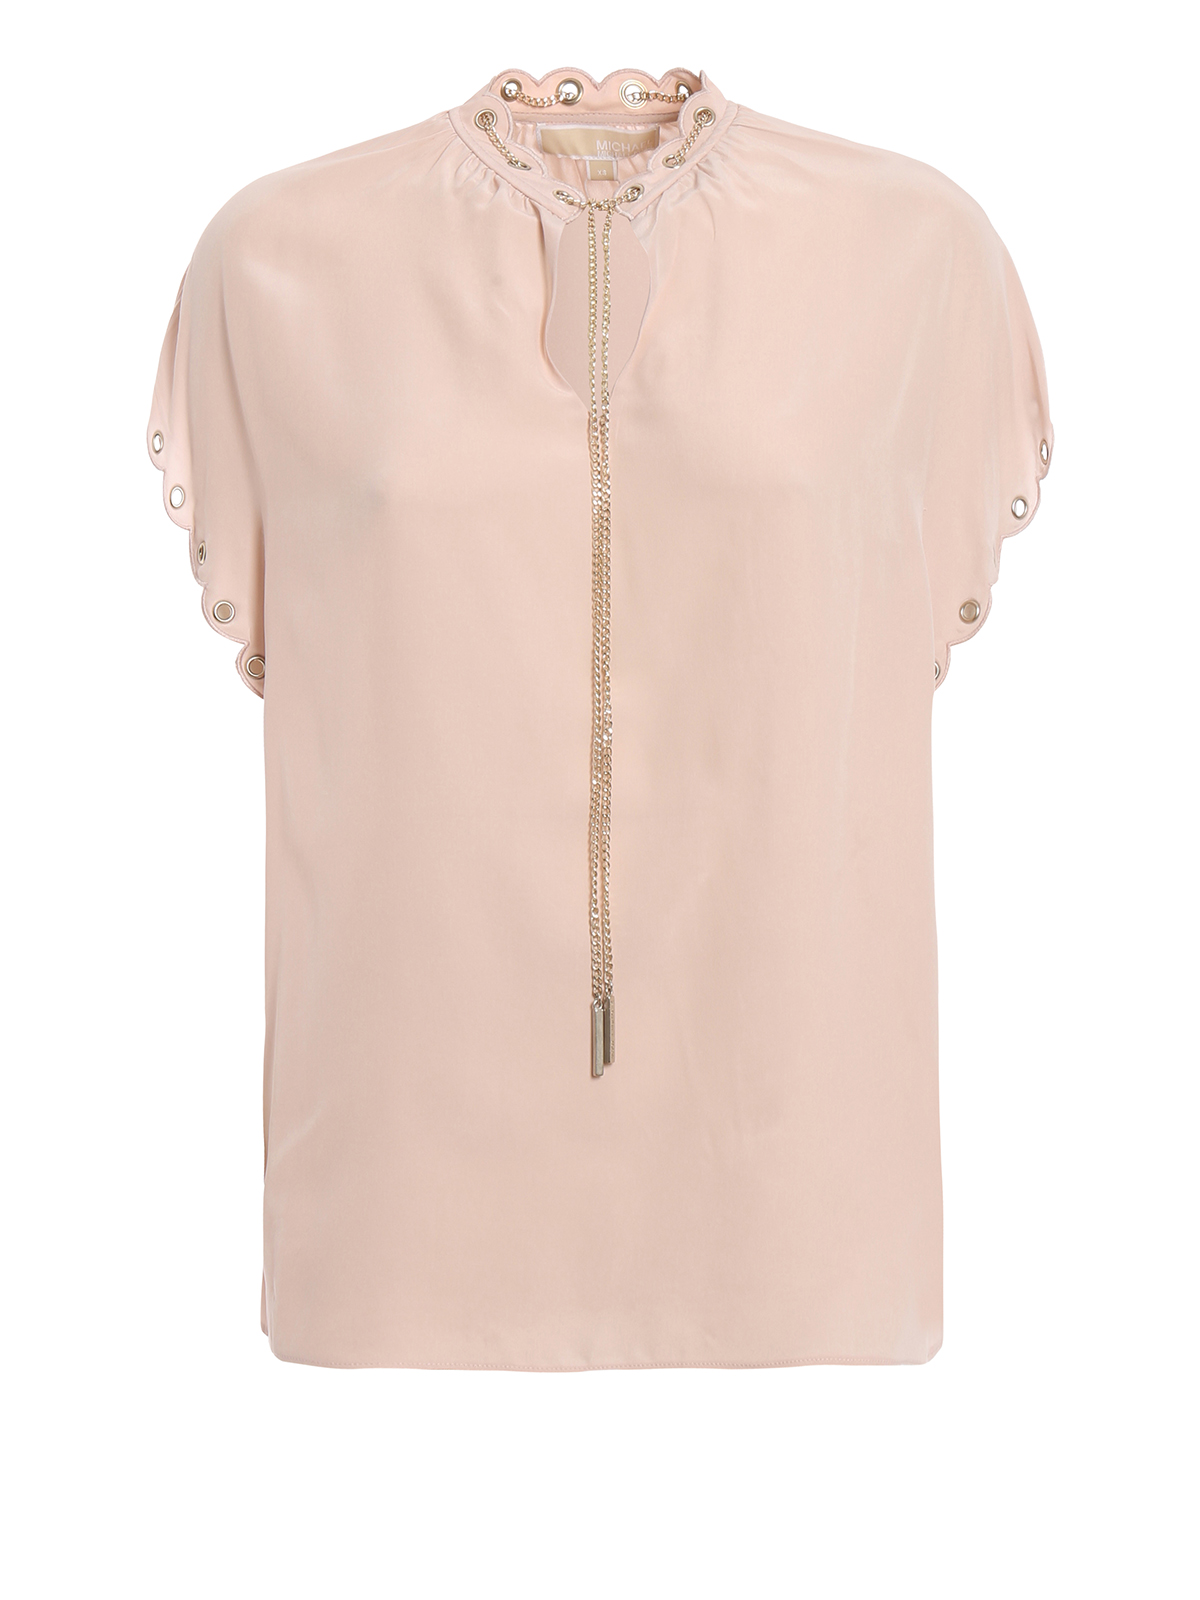 Michael Kors Silk Crepe Blouse With Chain And Eyelets In Light Pink